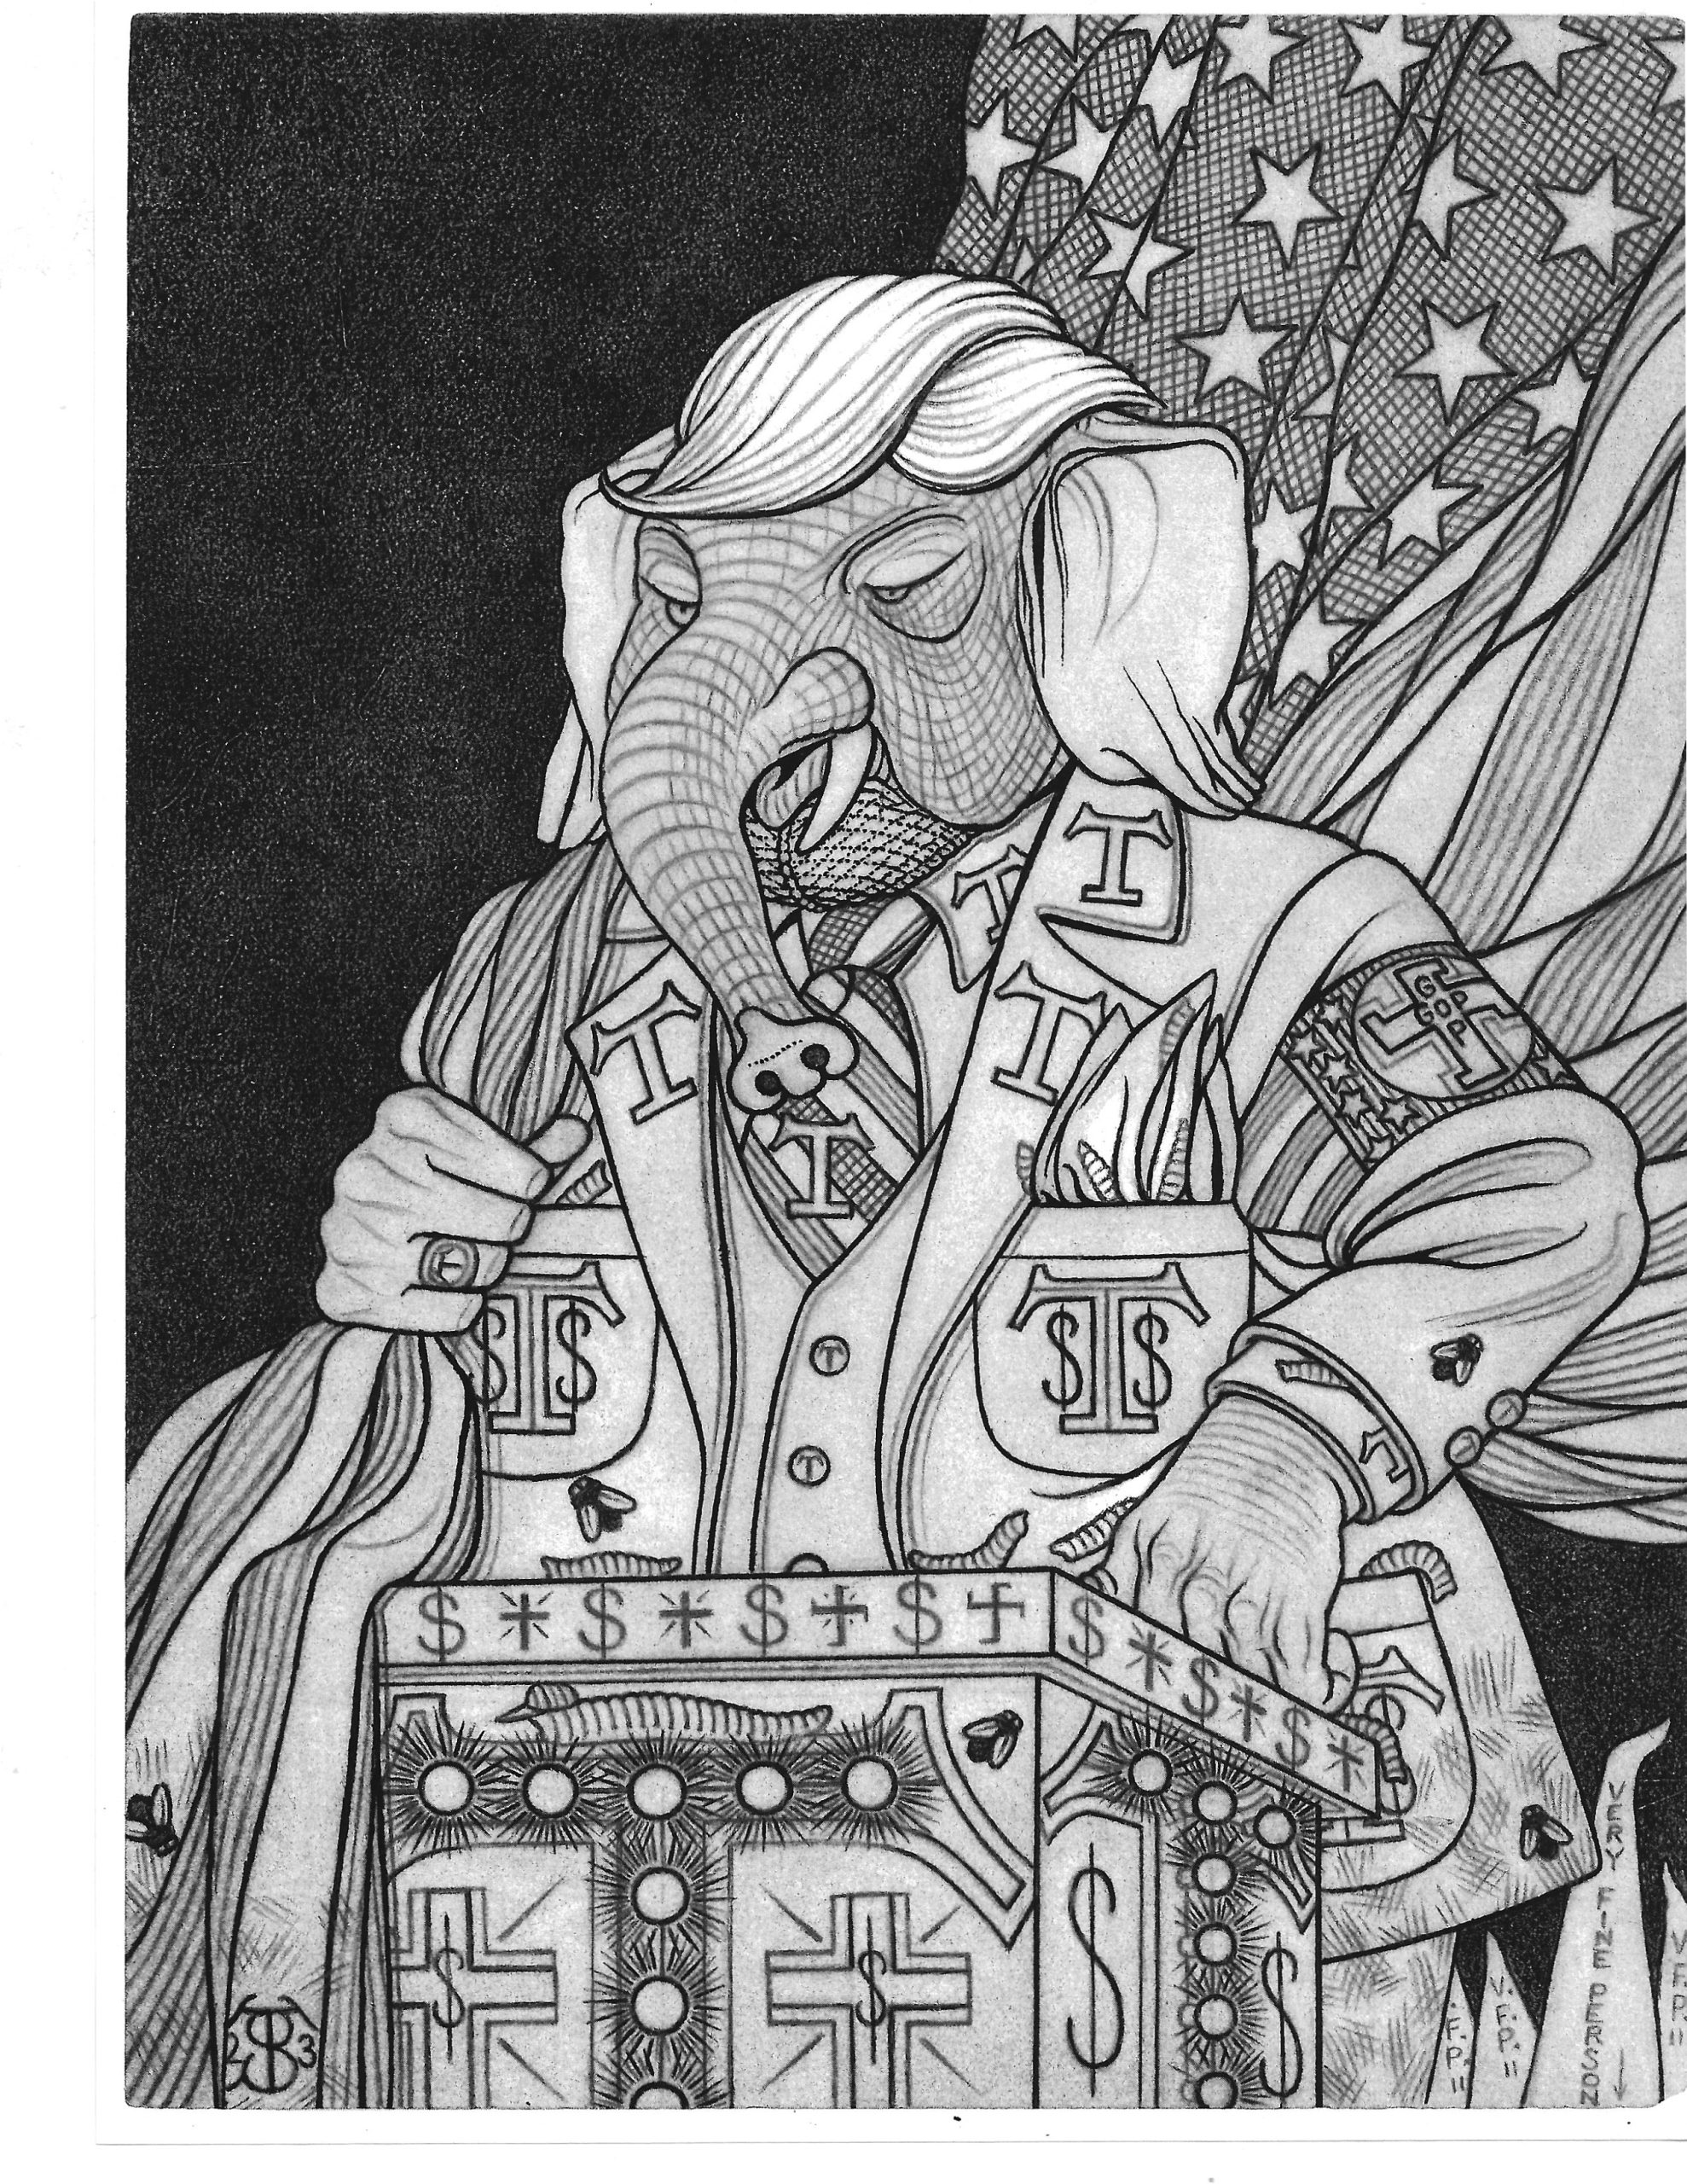 Illustration of President Trump as an elephant, styled after a propoganda poster originally depicting Adolph Hitler